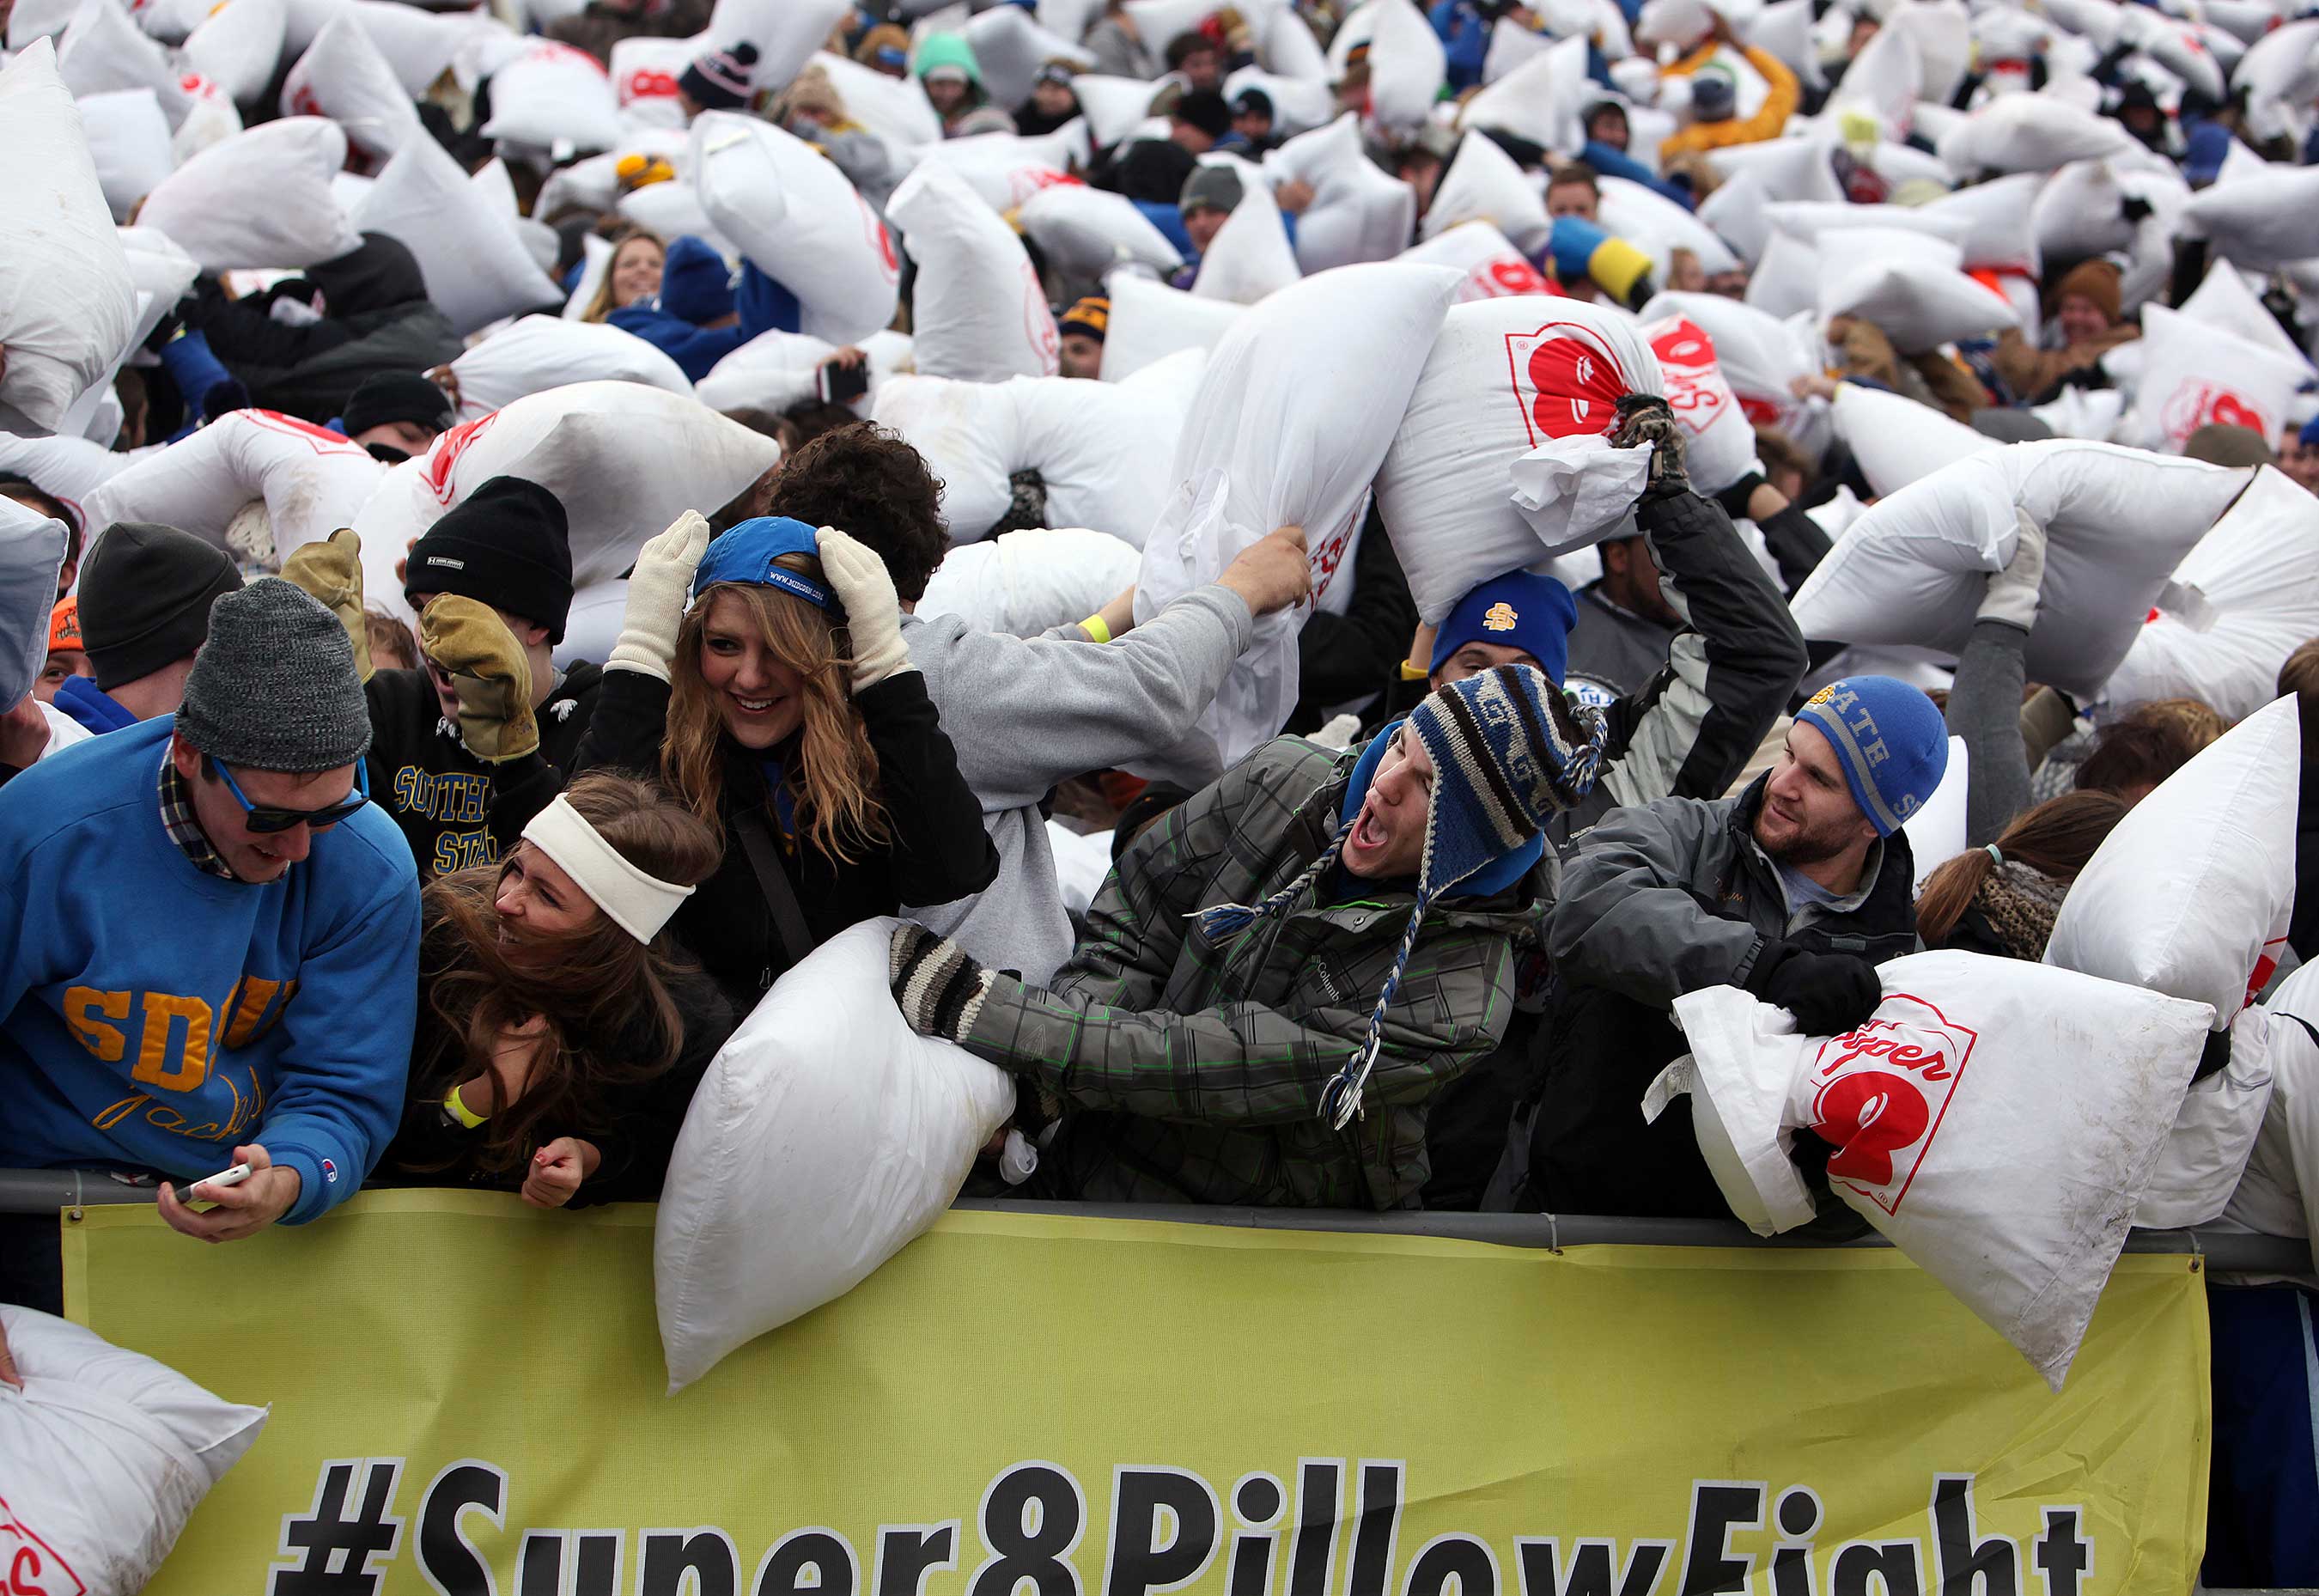  South Dakota State University students and fans participate in pillow fight to break the Guinness World Record for the largest pillow fight. (Photo by Jay Pickthorn/Invision for Super 8) 